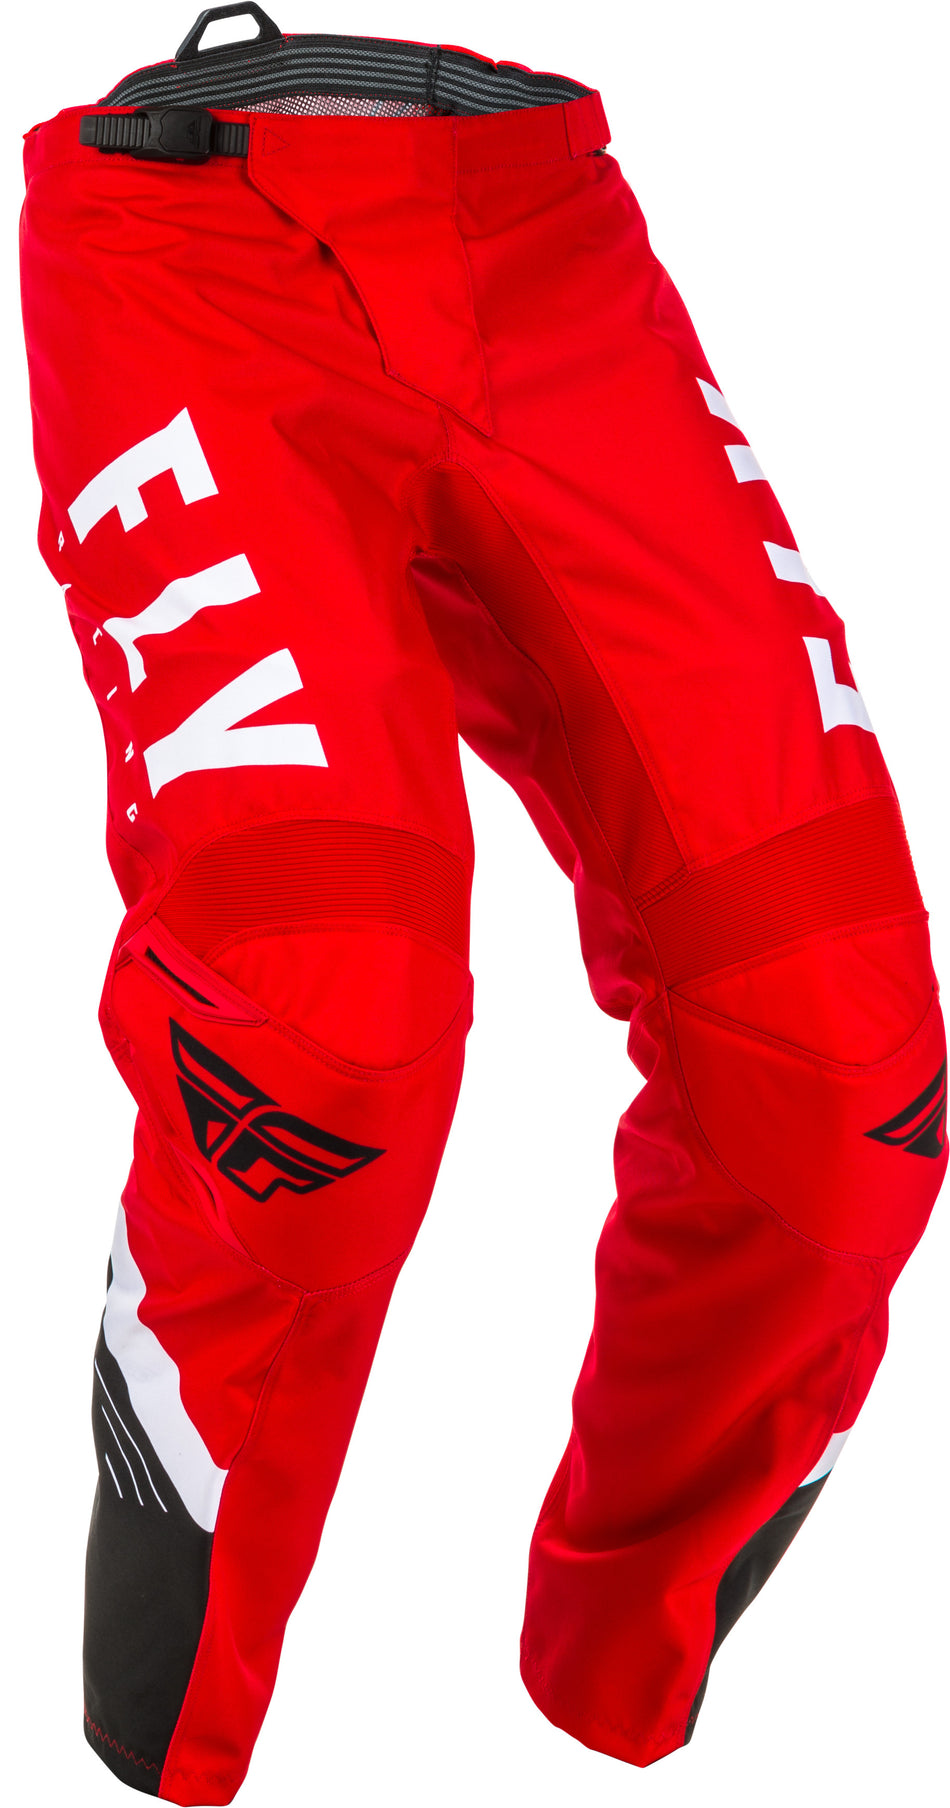 FLY RACING F-16 Pants Red/Black/White Sz 26 373-93326